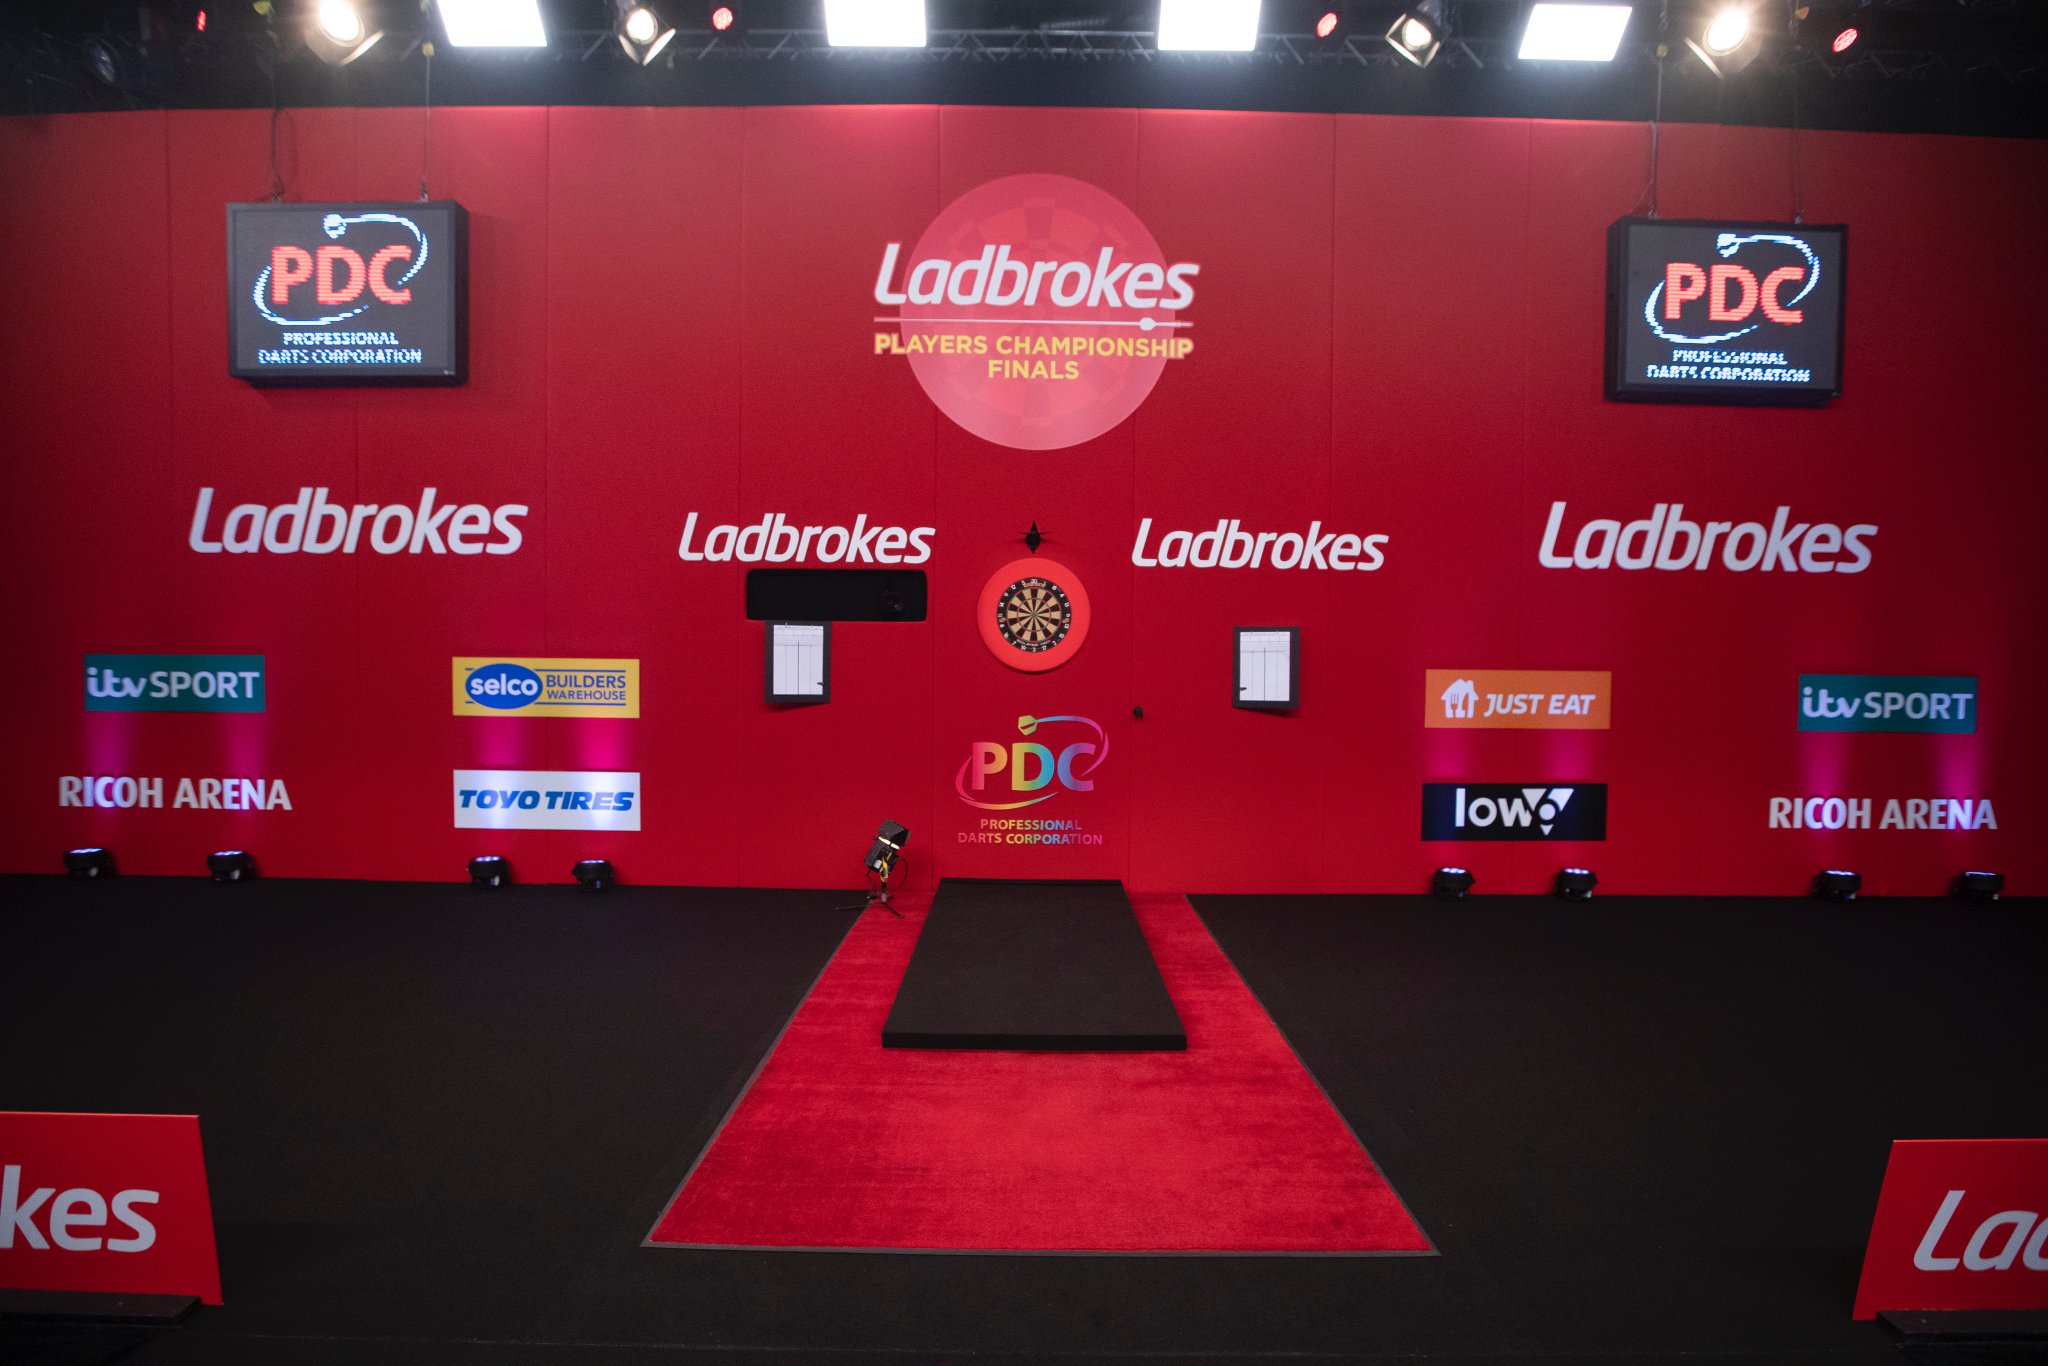 Ladbrokes Players Championship Finals: Day One Live Blog